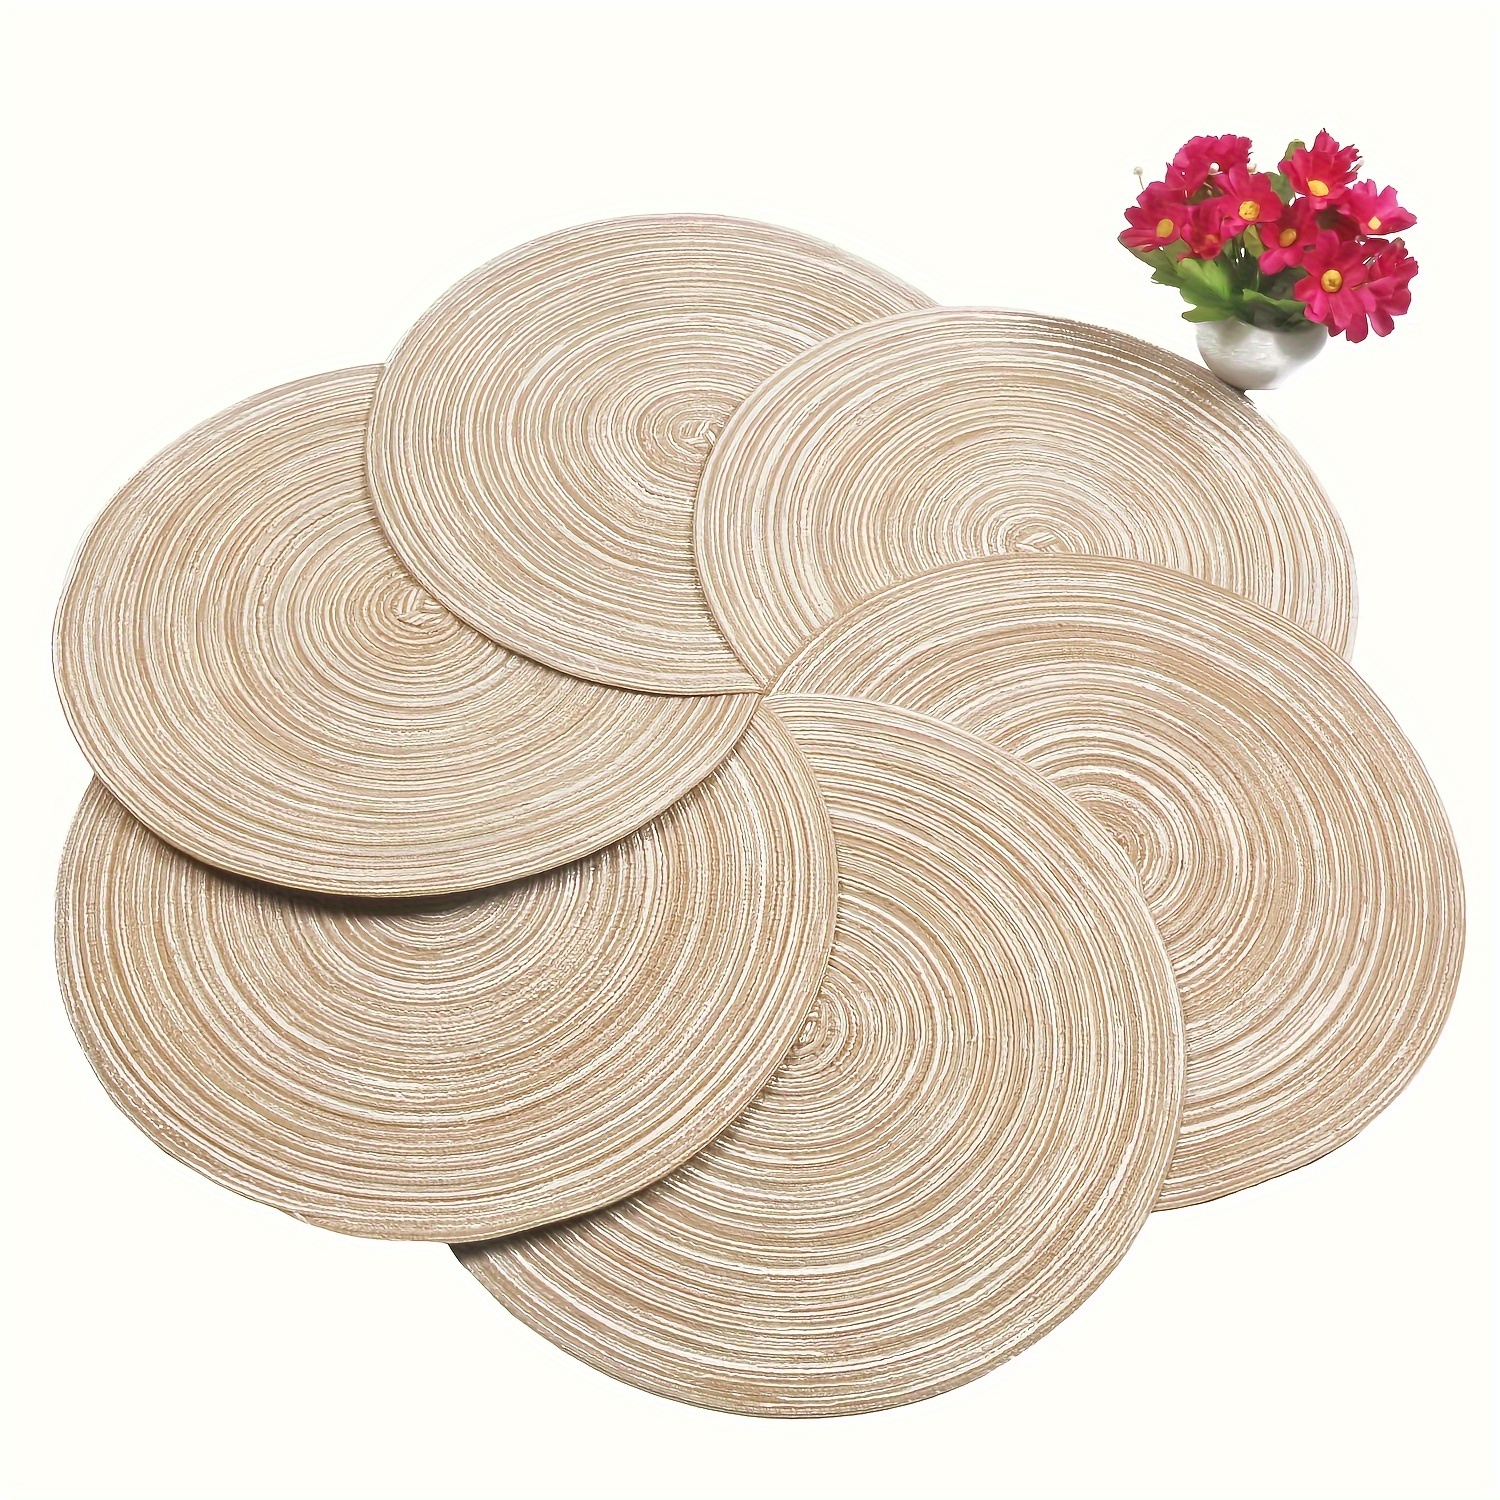 

bohemian Elegance" Boho-chic Round Woven Placemat - Beige Cotton Table Mat For Dining, Kitchen, Restaurant & Coffee Shop Decor | Hand Wash Only